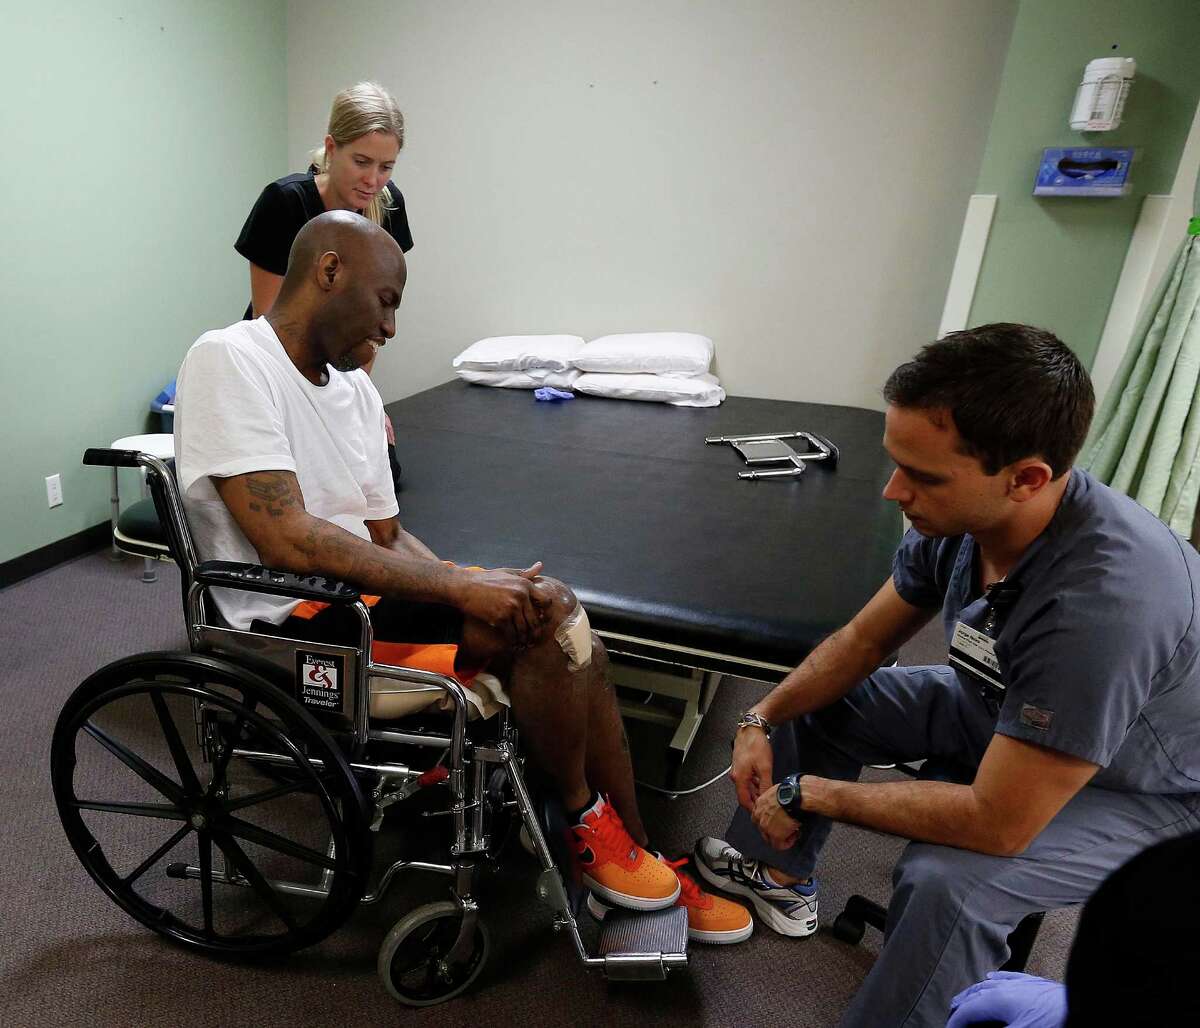 Quincy Davis works with physical therapist, Jorge Neira, and OTR student, Lindsay Eckert at the Quentin Mease Community Hospital, Friday, Aug. 12, 2016, in Houston. Davis and his family say that he was denied proper medical treatment during his two years in the Waller County Jail, where he was awaiting trial on charges for drugs and for assaulting police. After a month in two hospitals, he is now at this rehab hospital.